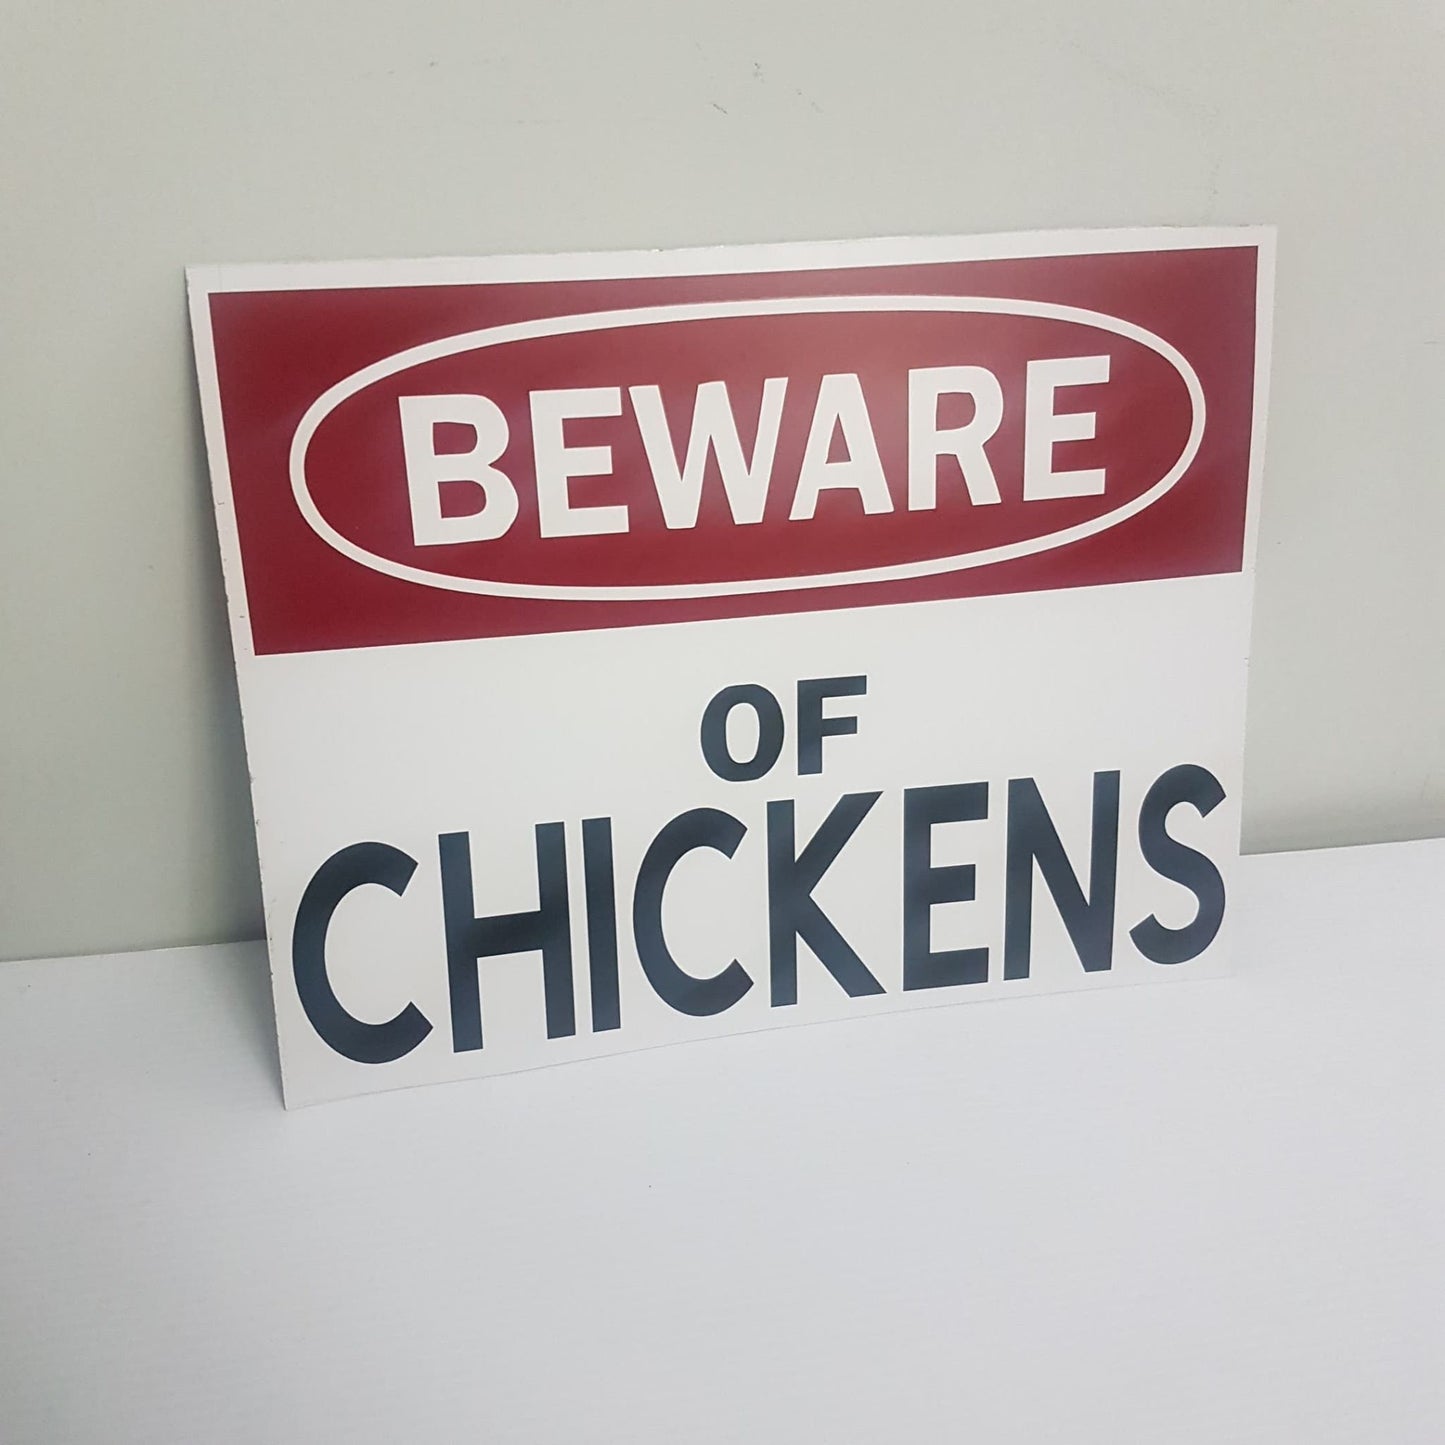 chicken coop sign - coop rules what happens in the coop stays in the coop